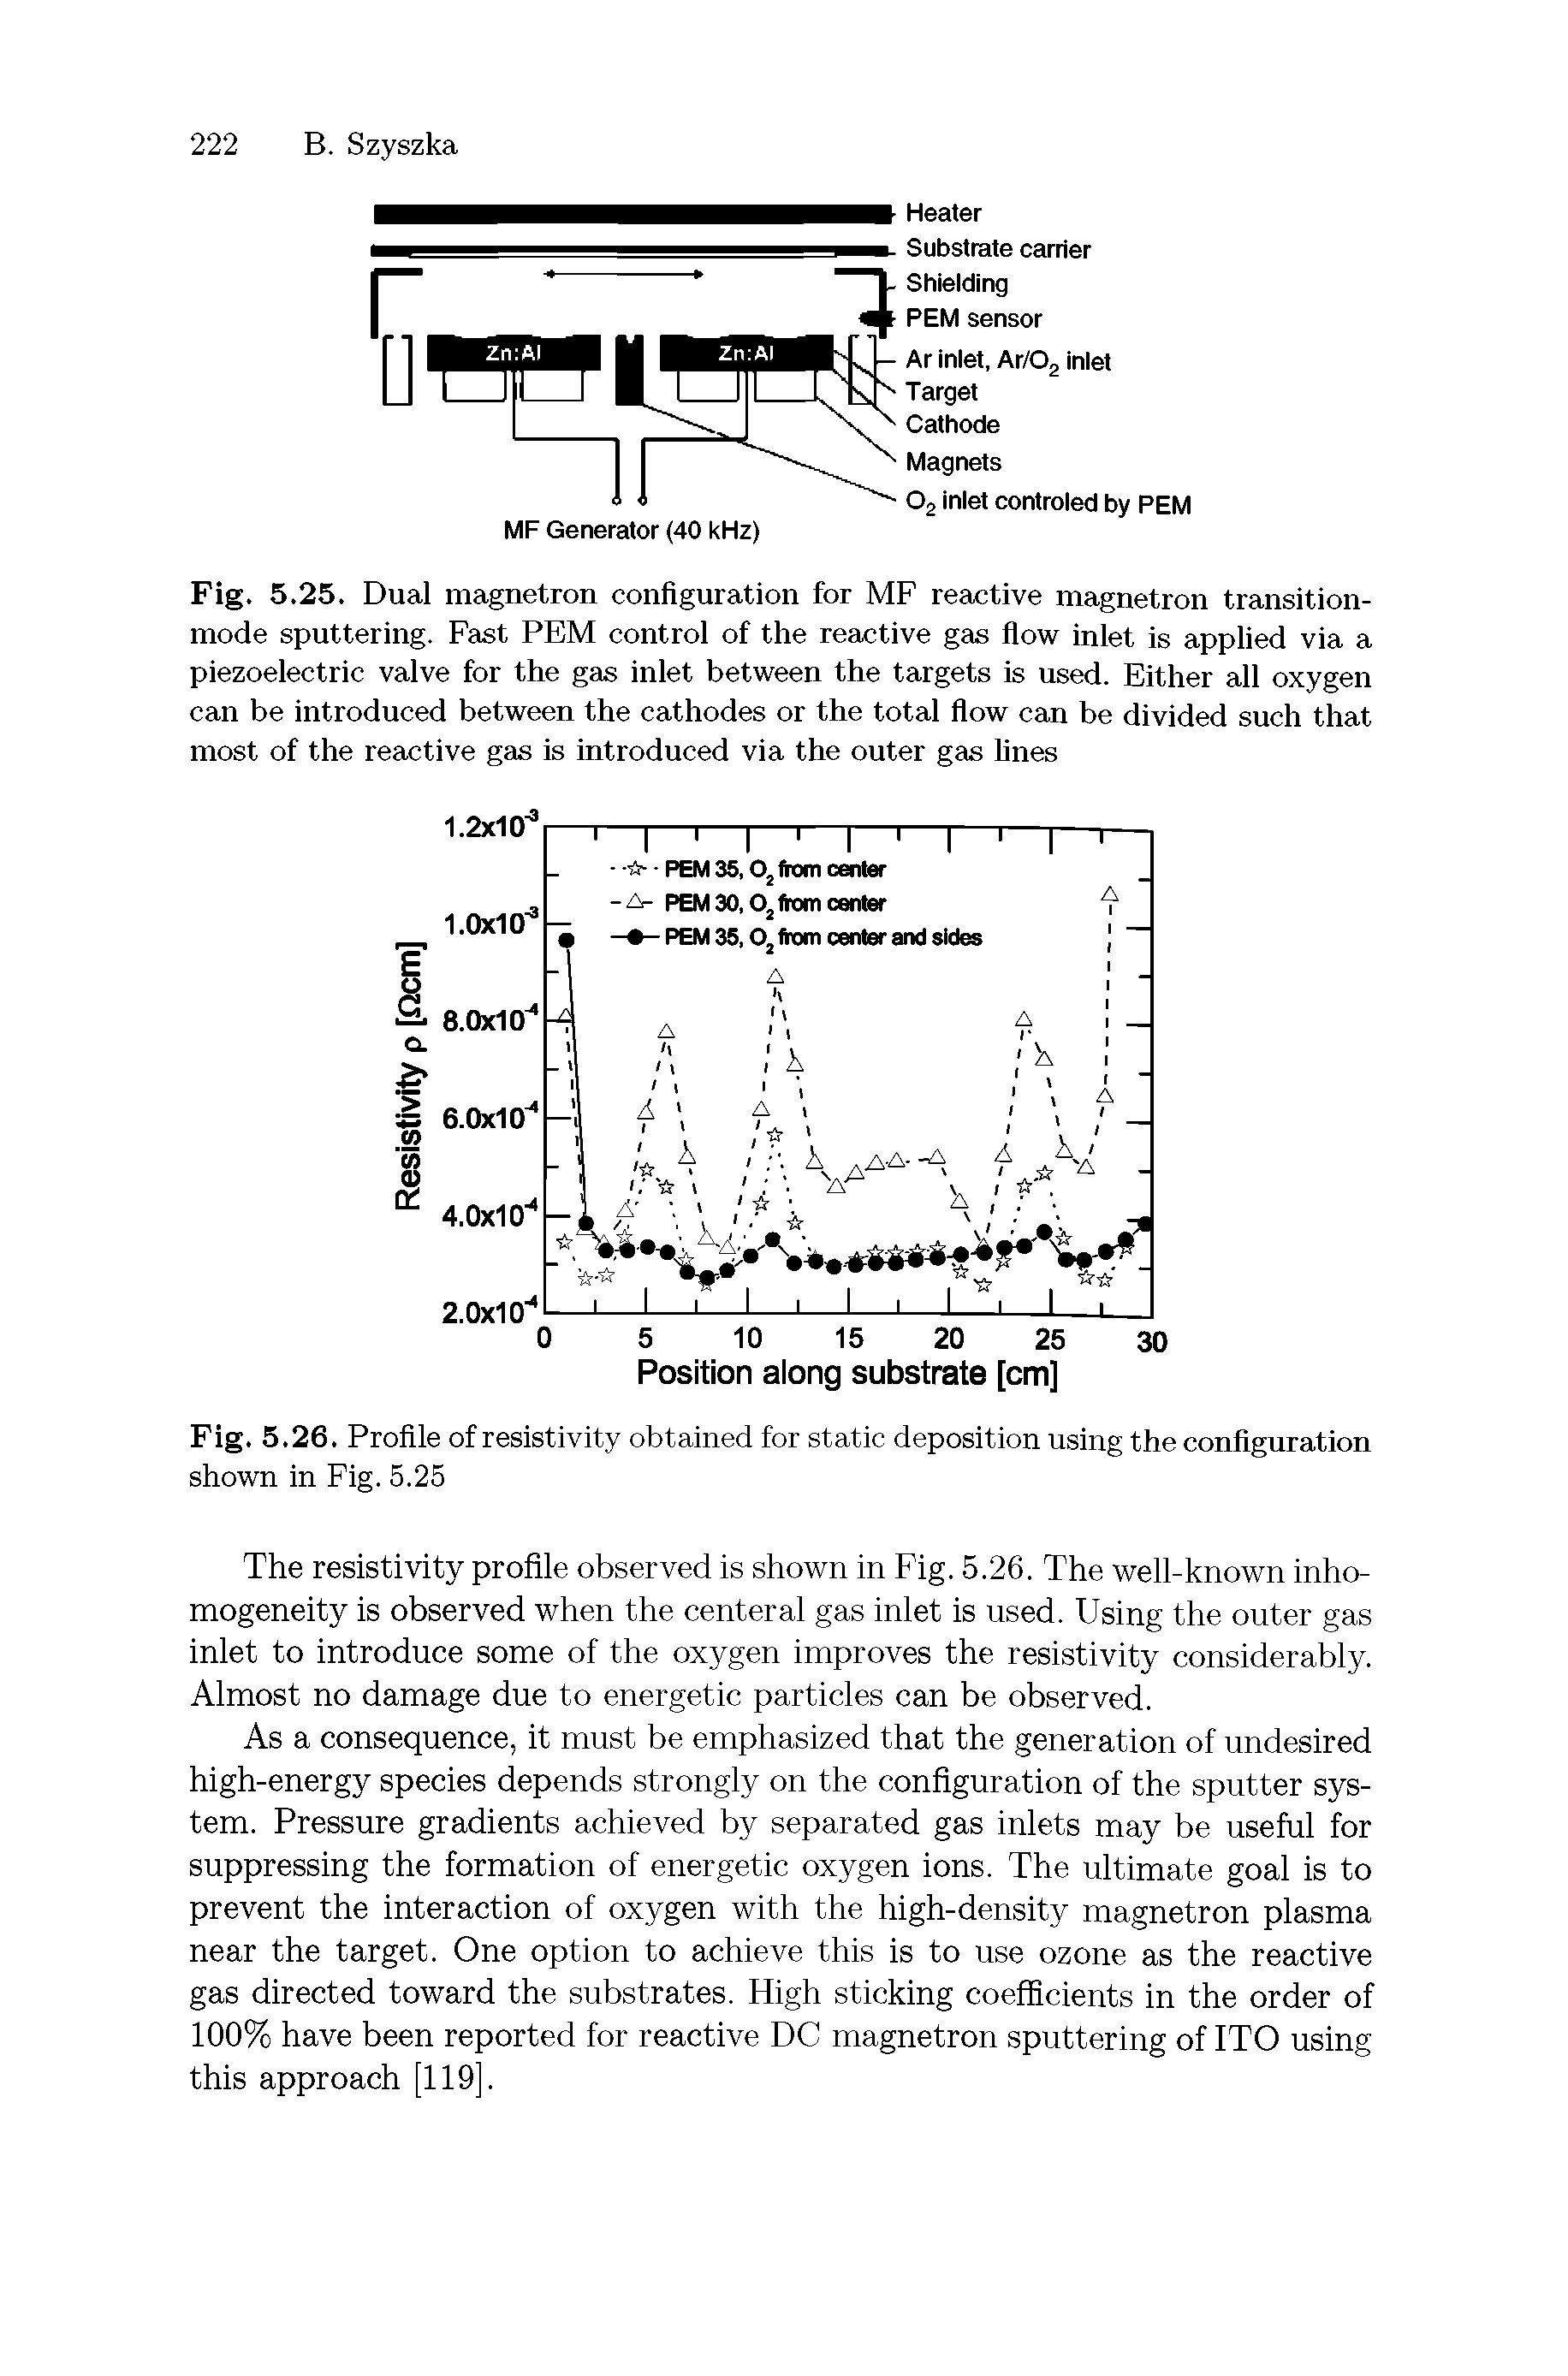 Fig. 5.25. Dual magnetron configuration for MF reactive magnetron transitionmode sputtering. Fast PEM control of the reactive gas flow inlet is applied via a piezoelectric valve for the gas inlet between the targets is used. Either all oxygen can be introduced between the cathodes or the total flow can be divided such that most of the reactive gas is introduced via the outer gas lines...